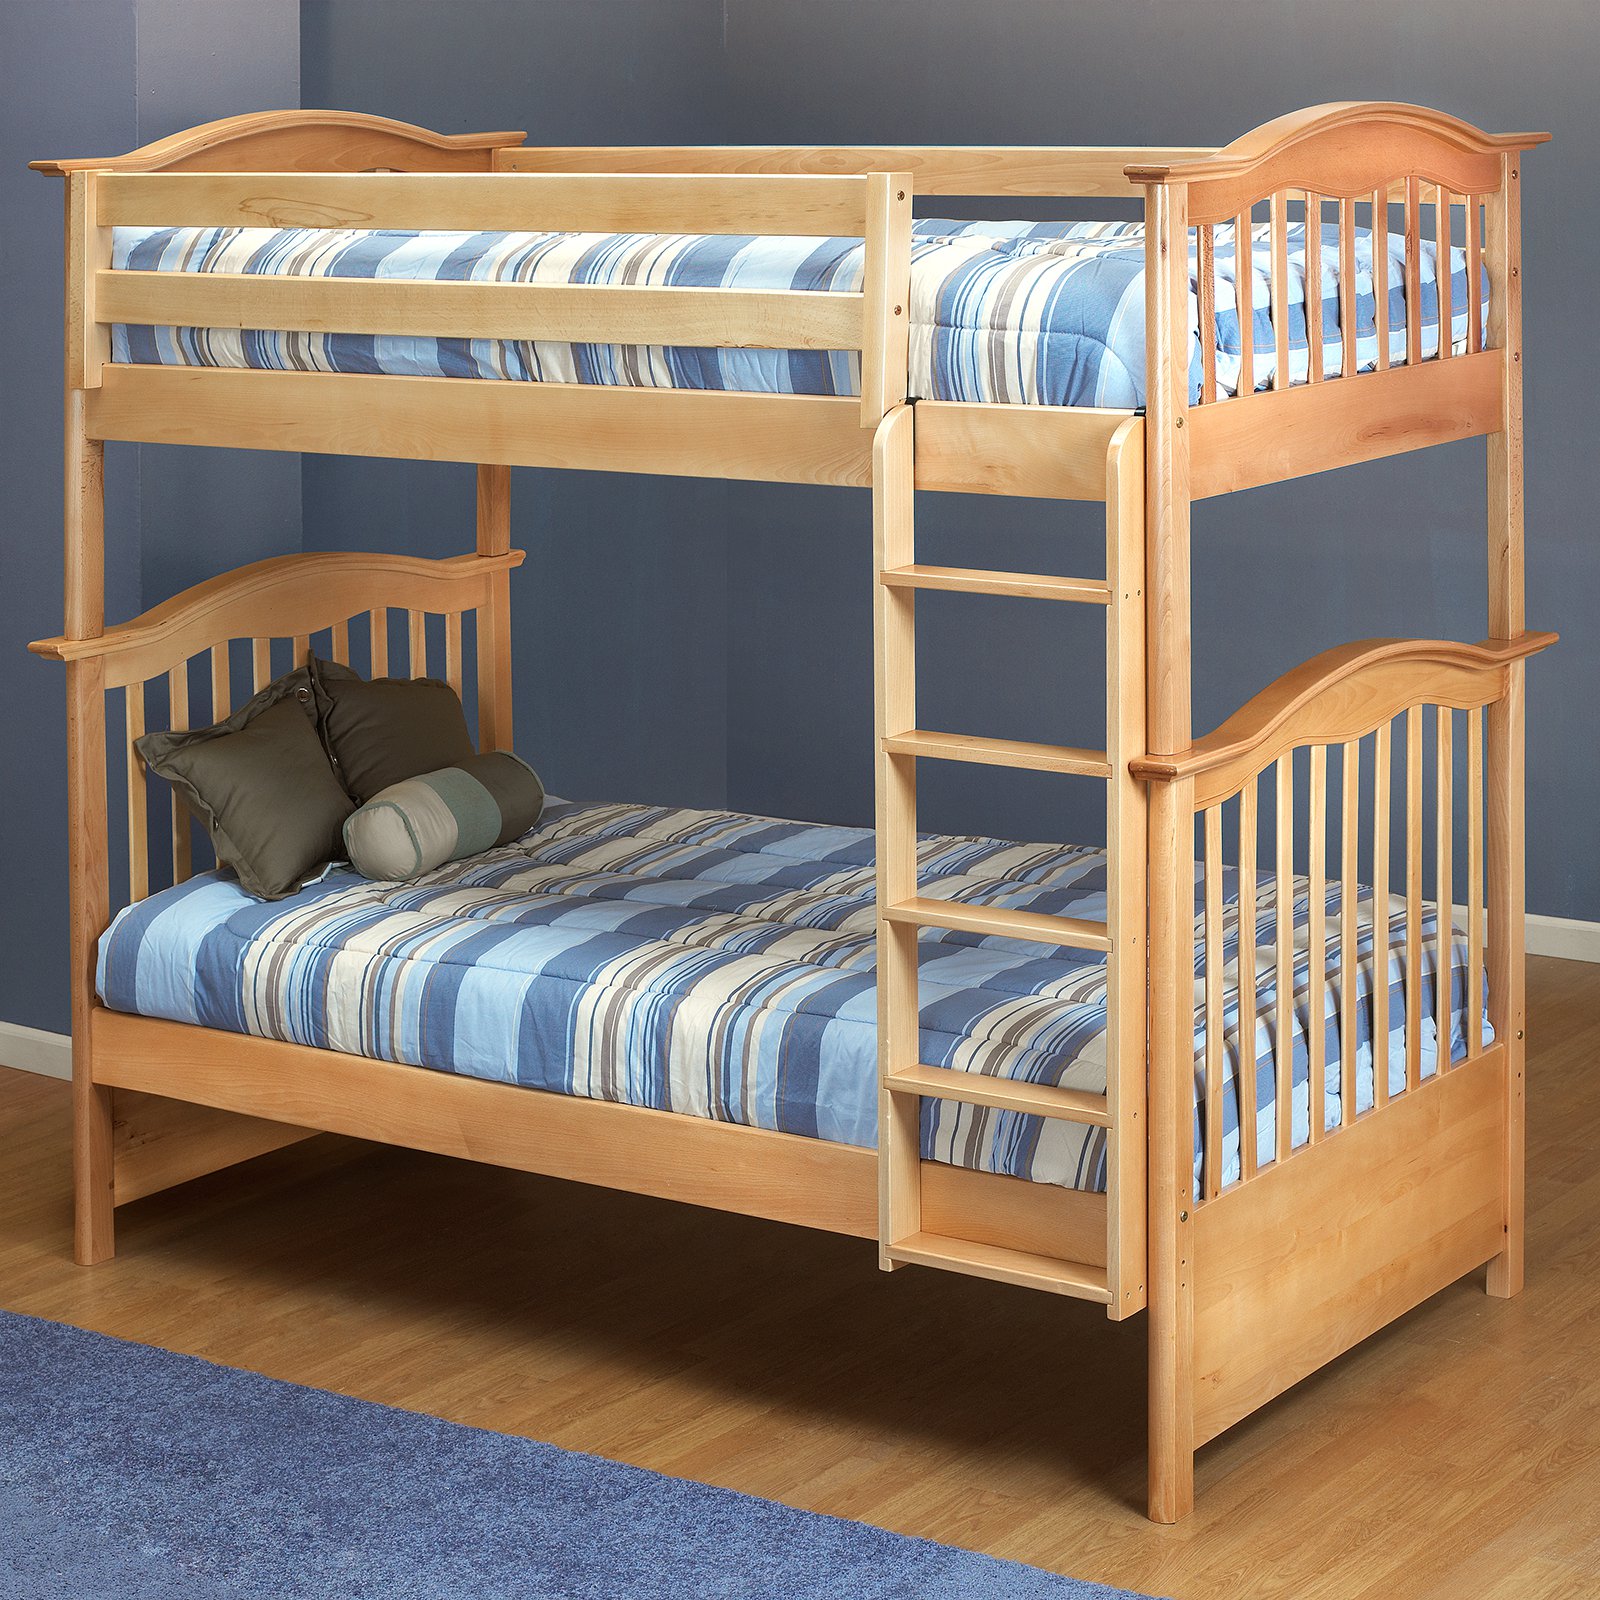 Orbelle Spindle Twin over Twin Bunk Bed - image 2 of 4